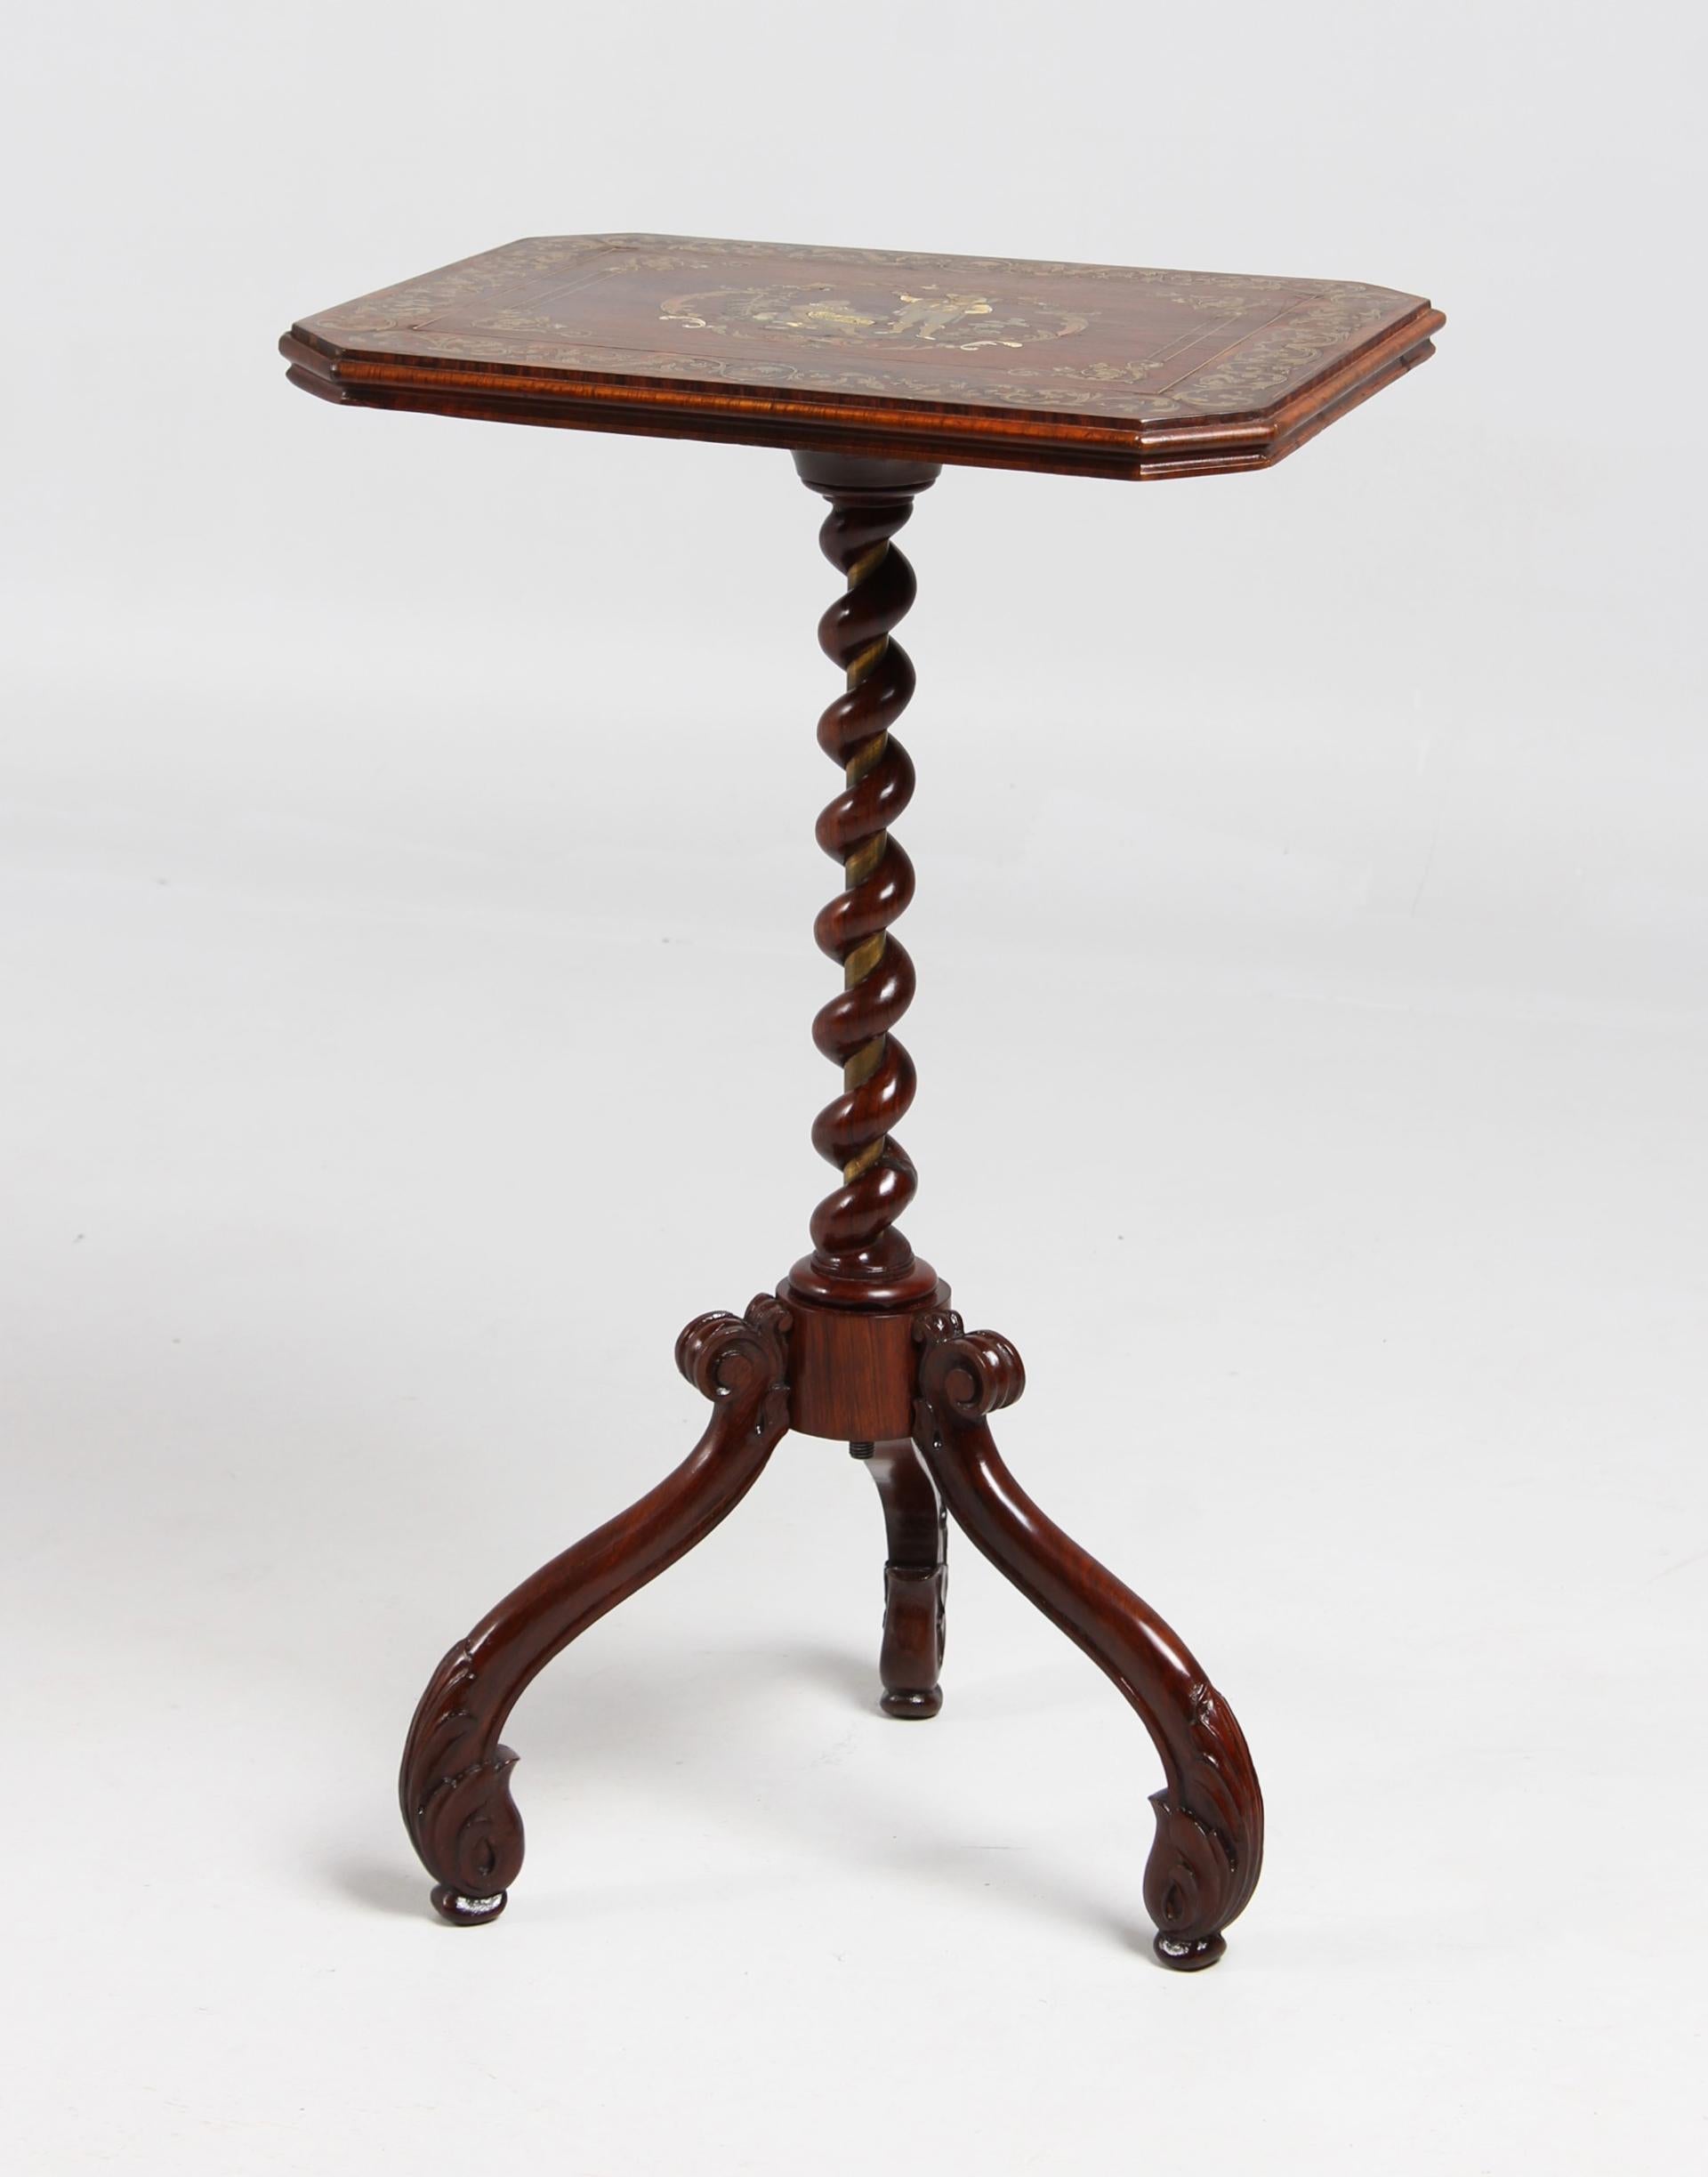 Side table with fine marquetry

France - Mid 19th century

Dimensions: H x W x D: 77 x 47 x 37 cm

Description:
Exceptional side table from the period around 1840, rarely found in this fineness.

In the center of a three-legged substructure rises a